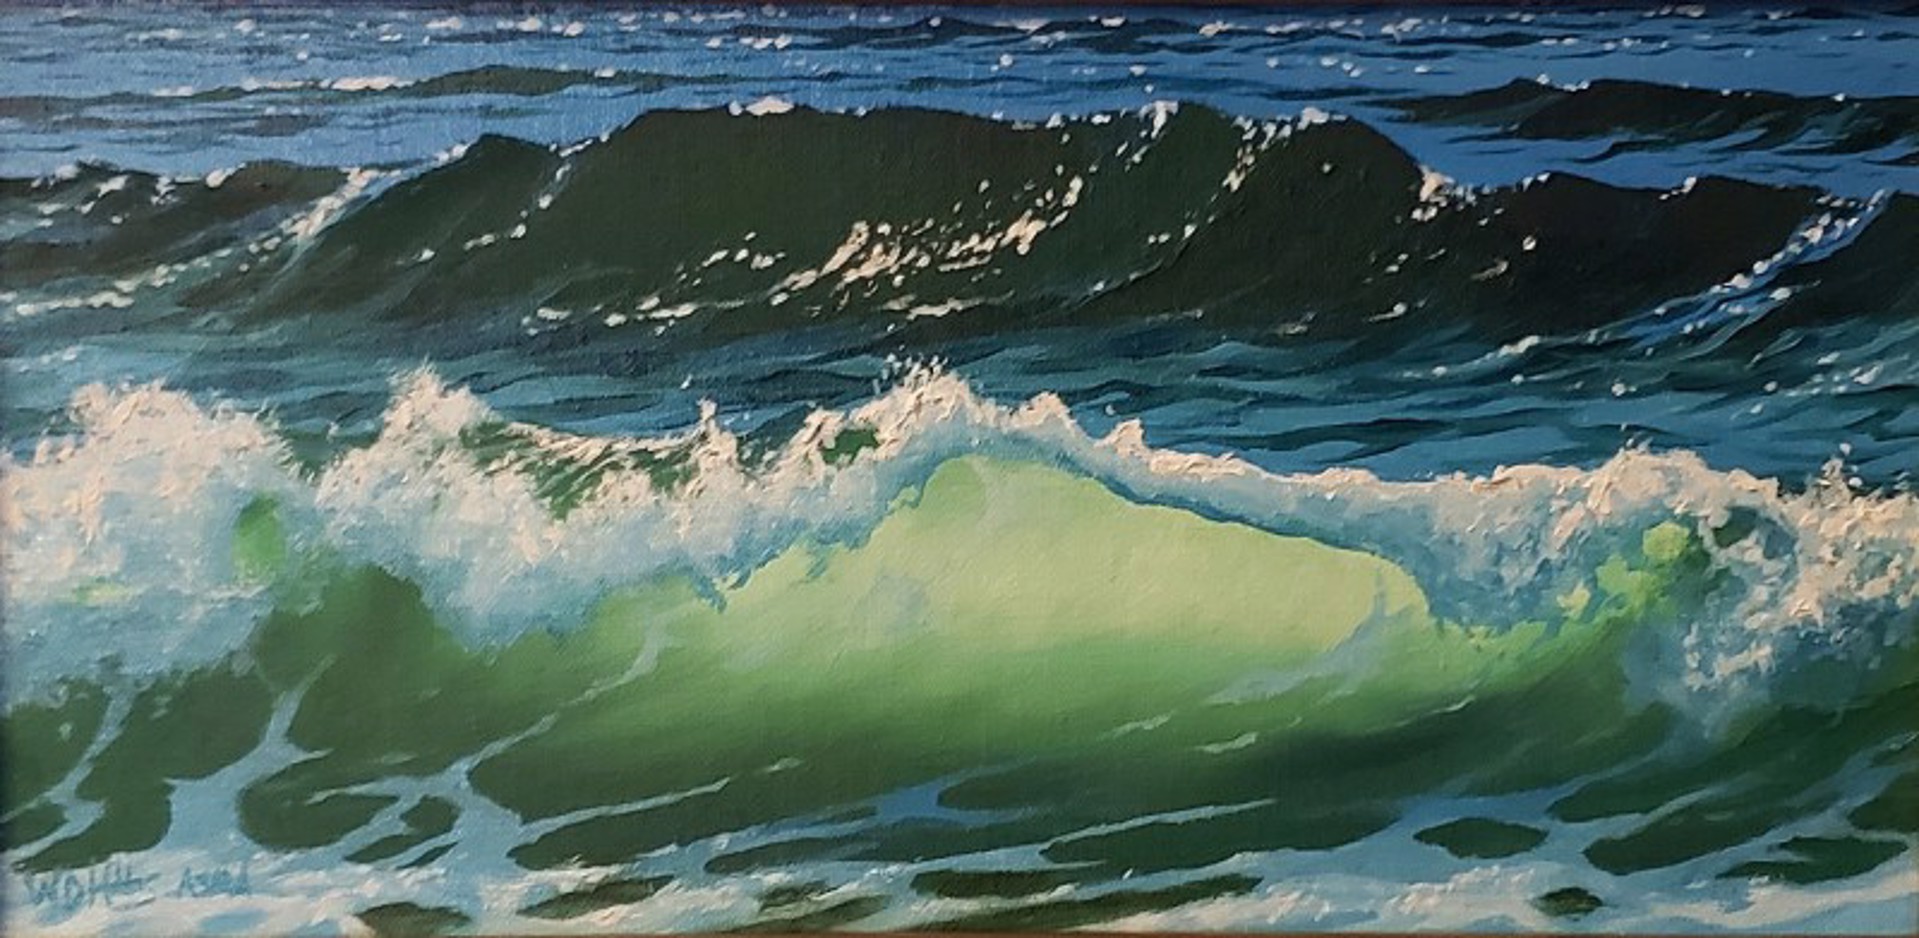 Study of the Surf in Early Light by William D. Hobbs